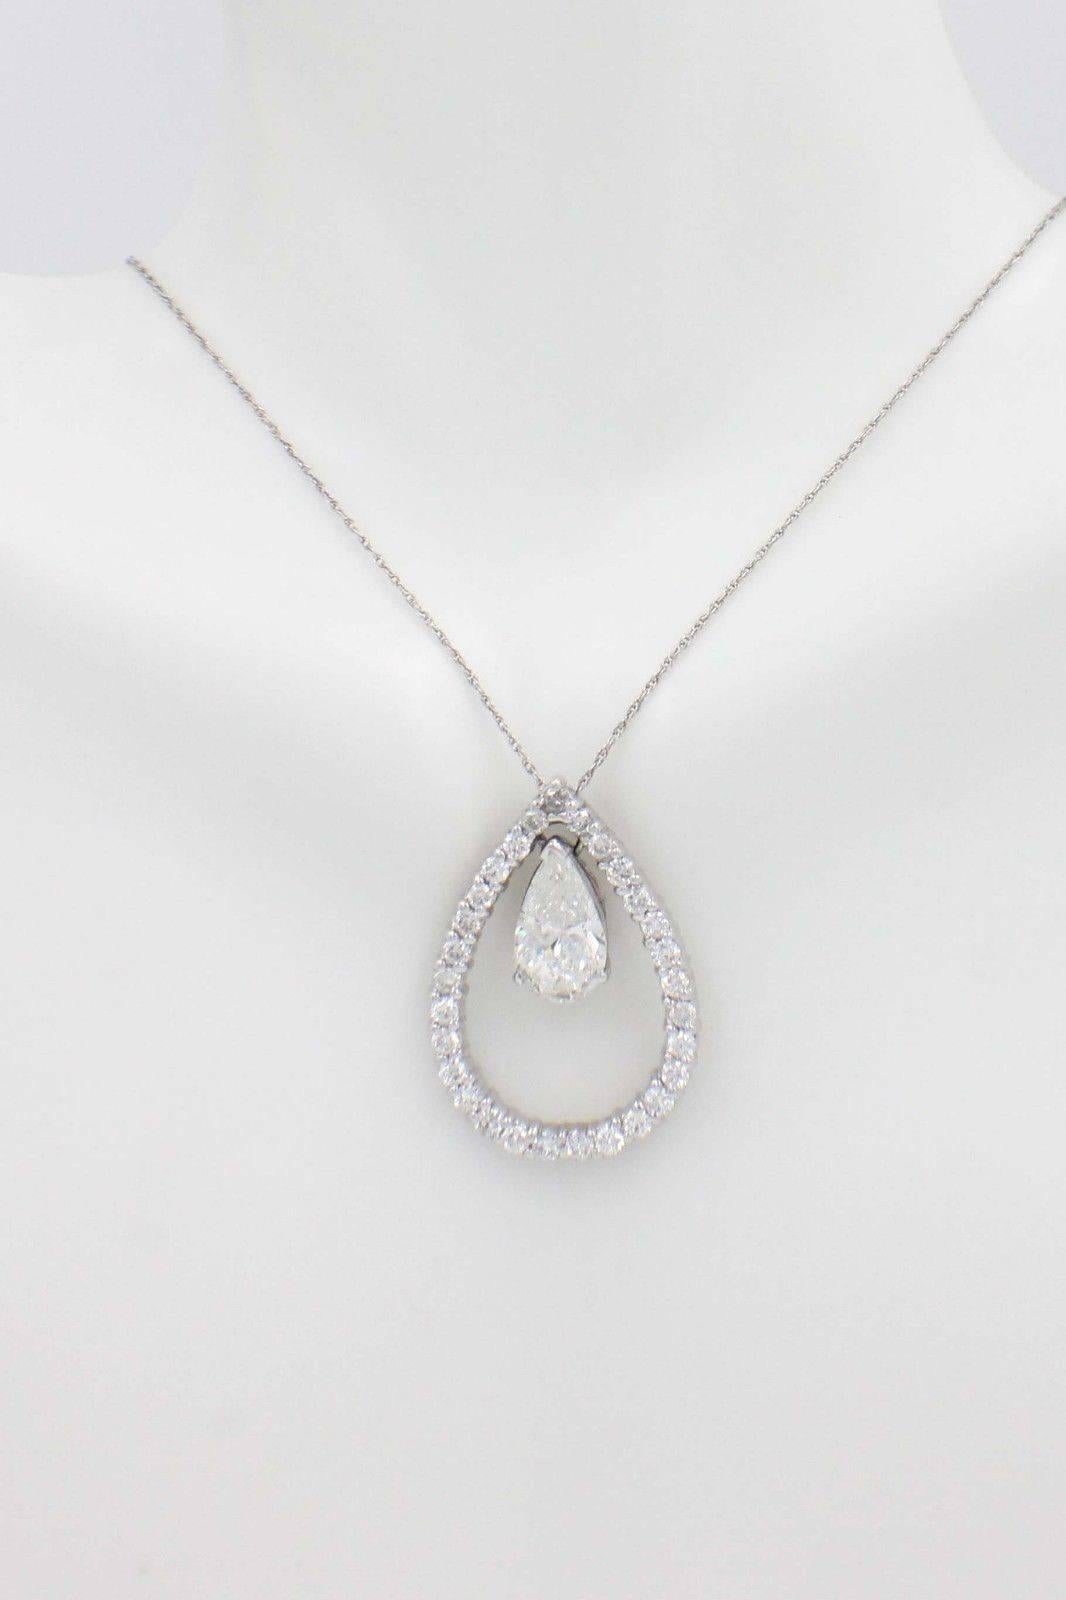 Pear Shape 3.88 Carat Diamond Pendant Necklace in 18 Karat White Gold In Excellent Condition For Sale In San Diego, CA